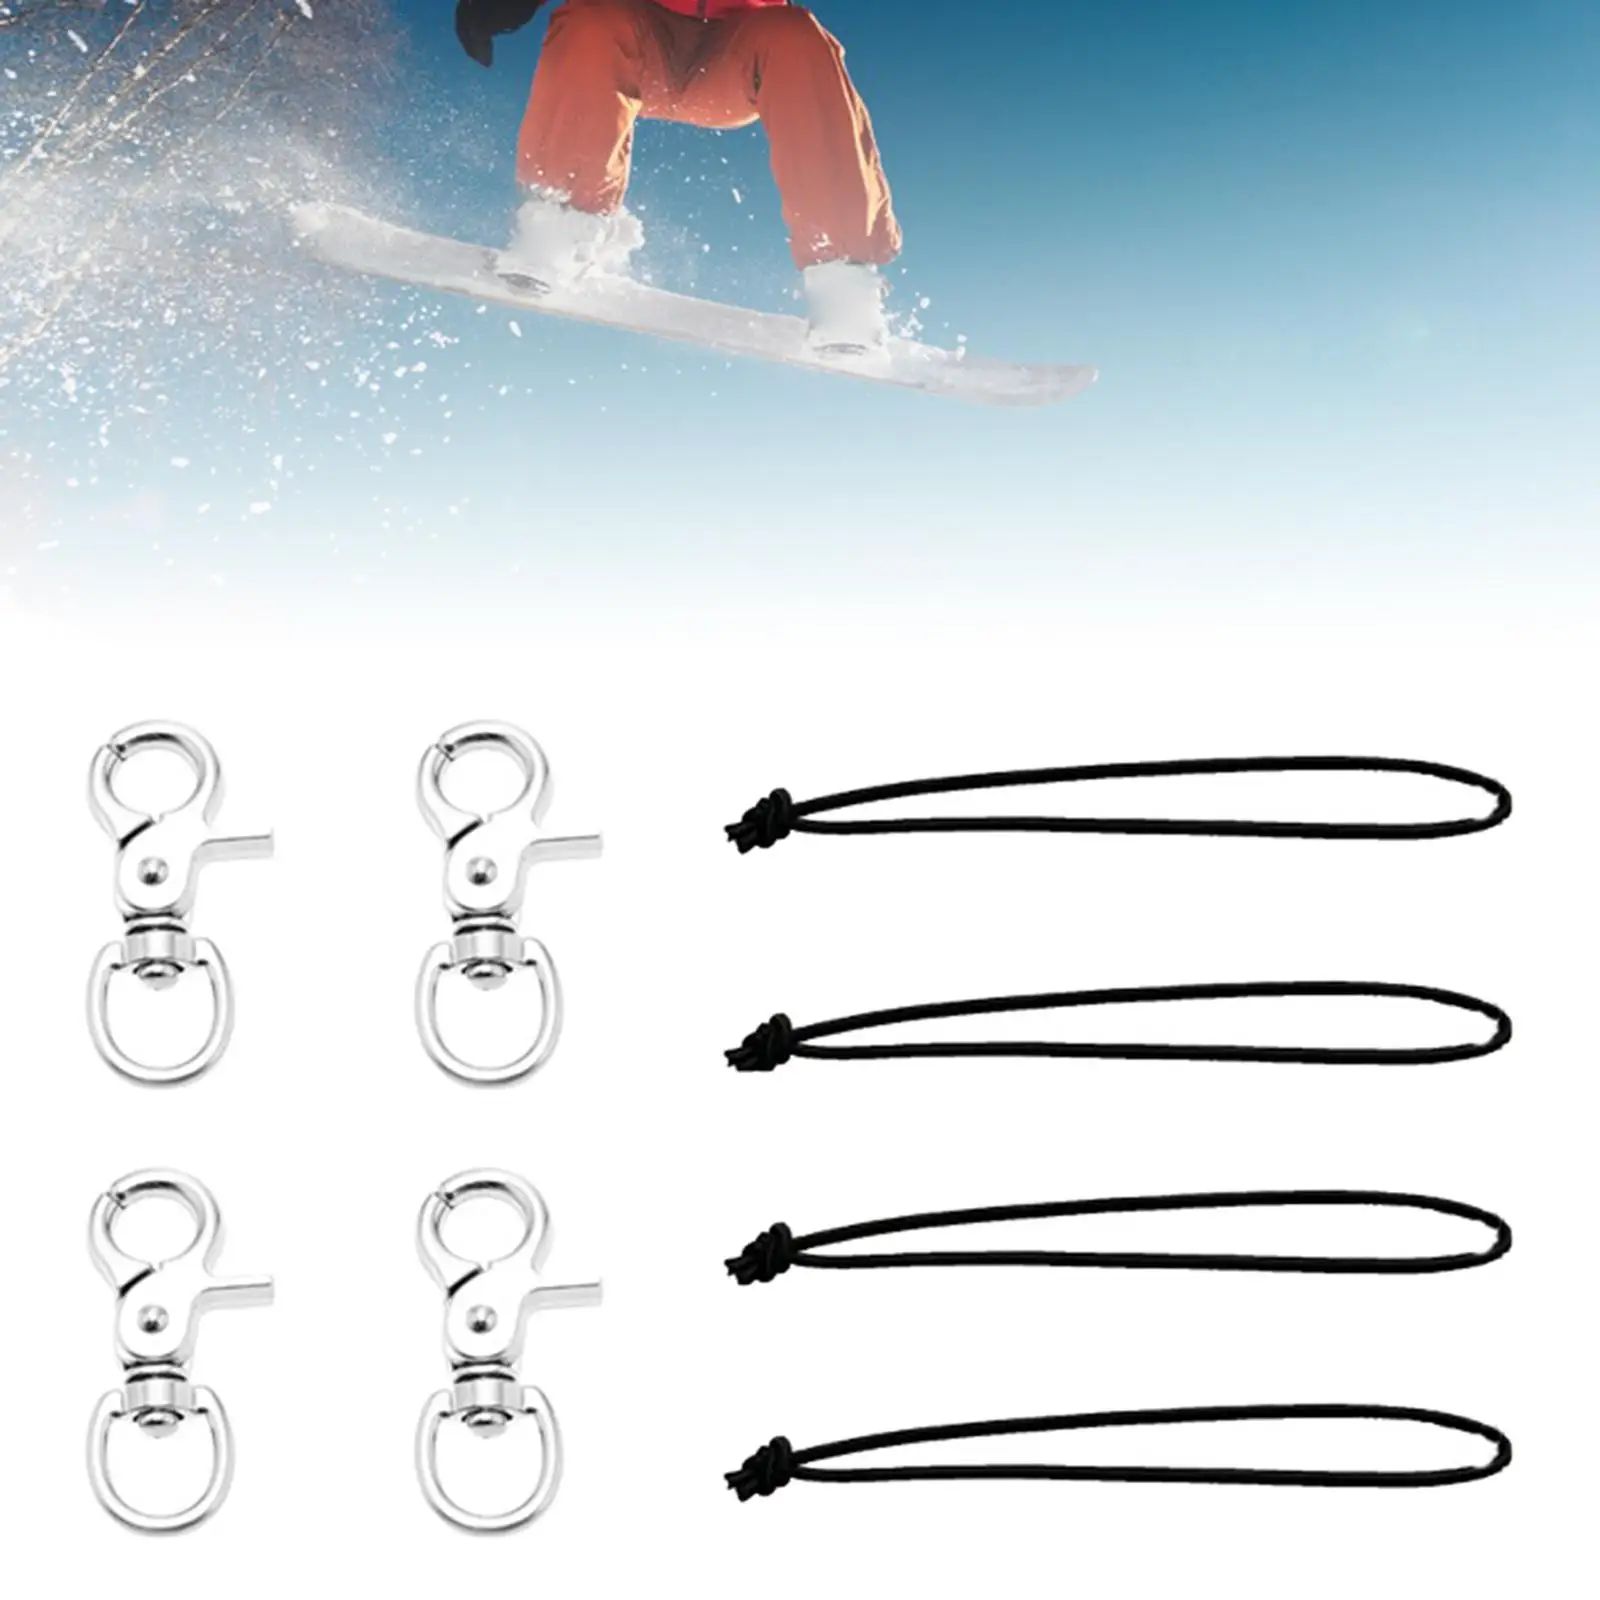 4x Heavy Duty Snowboard Leash Cord Snowboard Bindings Supplies Practical Ski Connecting Rope for Tents Beginners Window Curtain